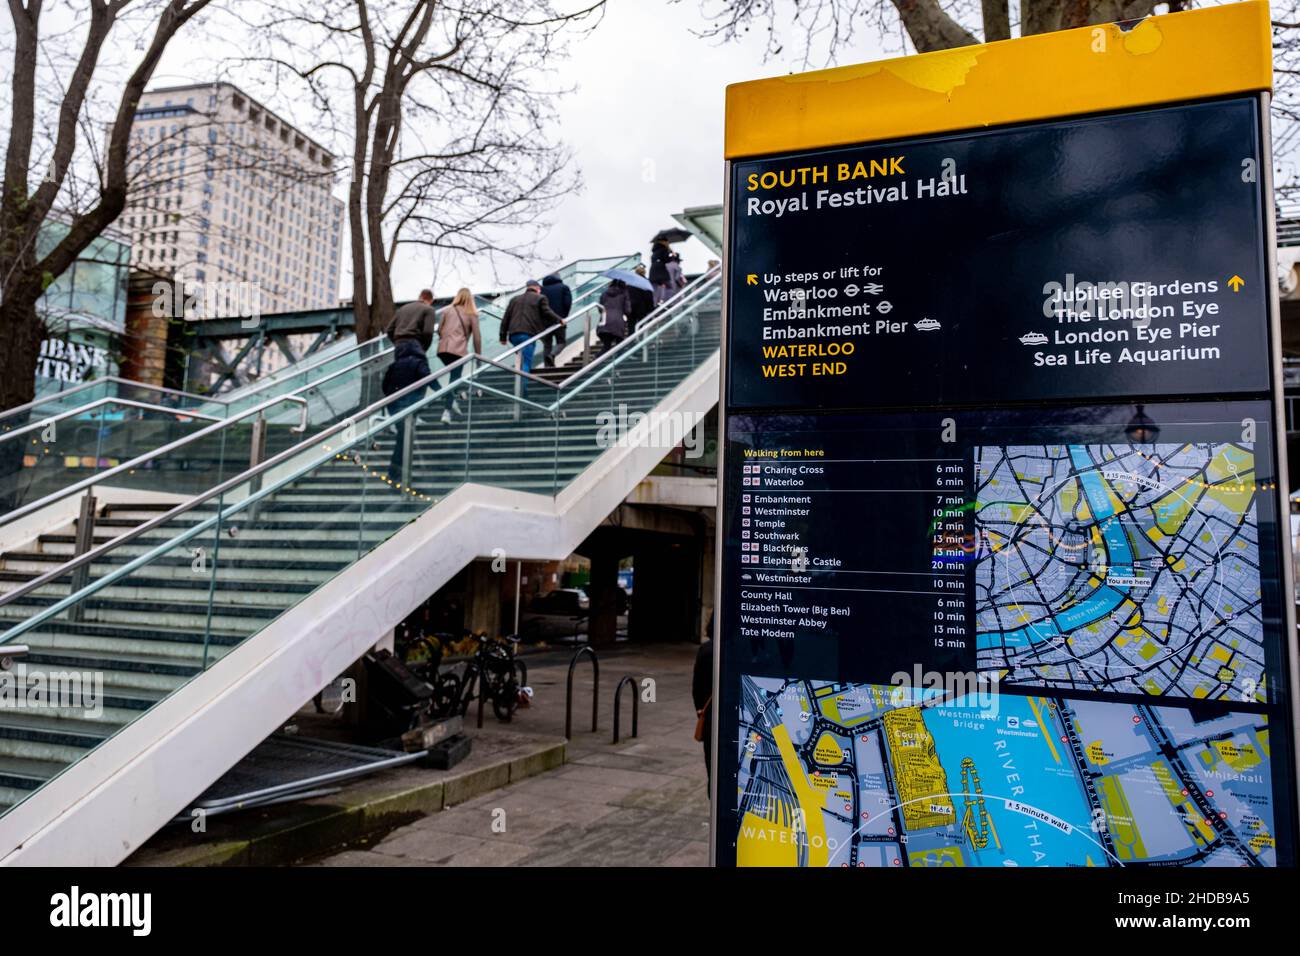 London England UK January 02 2022, People Climbing Stairs Next To Royal Festival Hall Tourist Route Map Southbank London Stock Photo